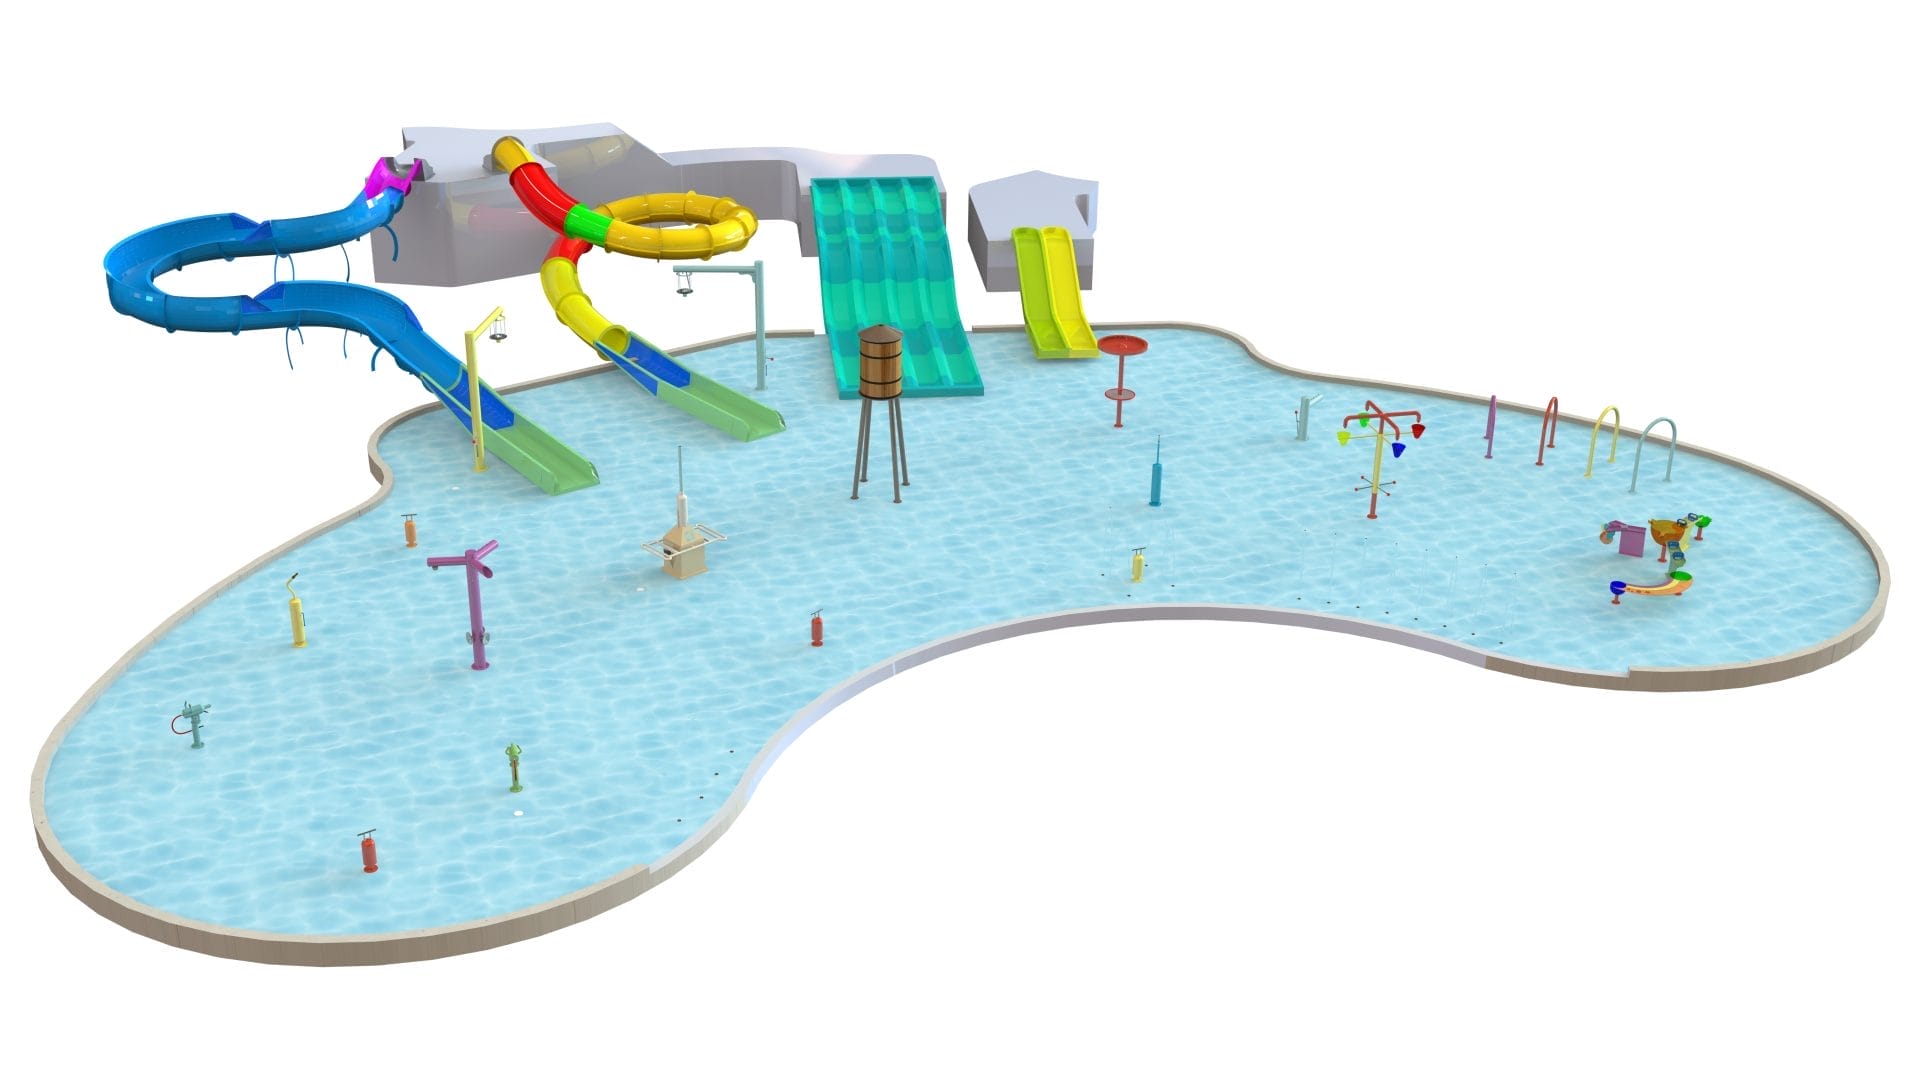 3D rendering of a splash pad concept design by Interactive Play, shows an option with several fun slides added.